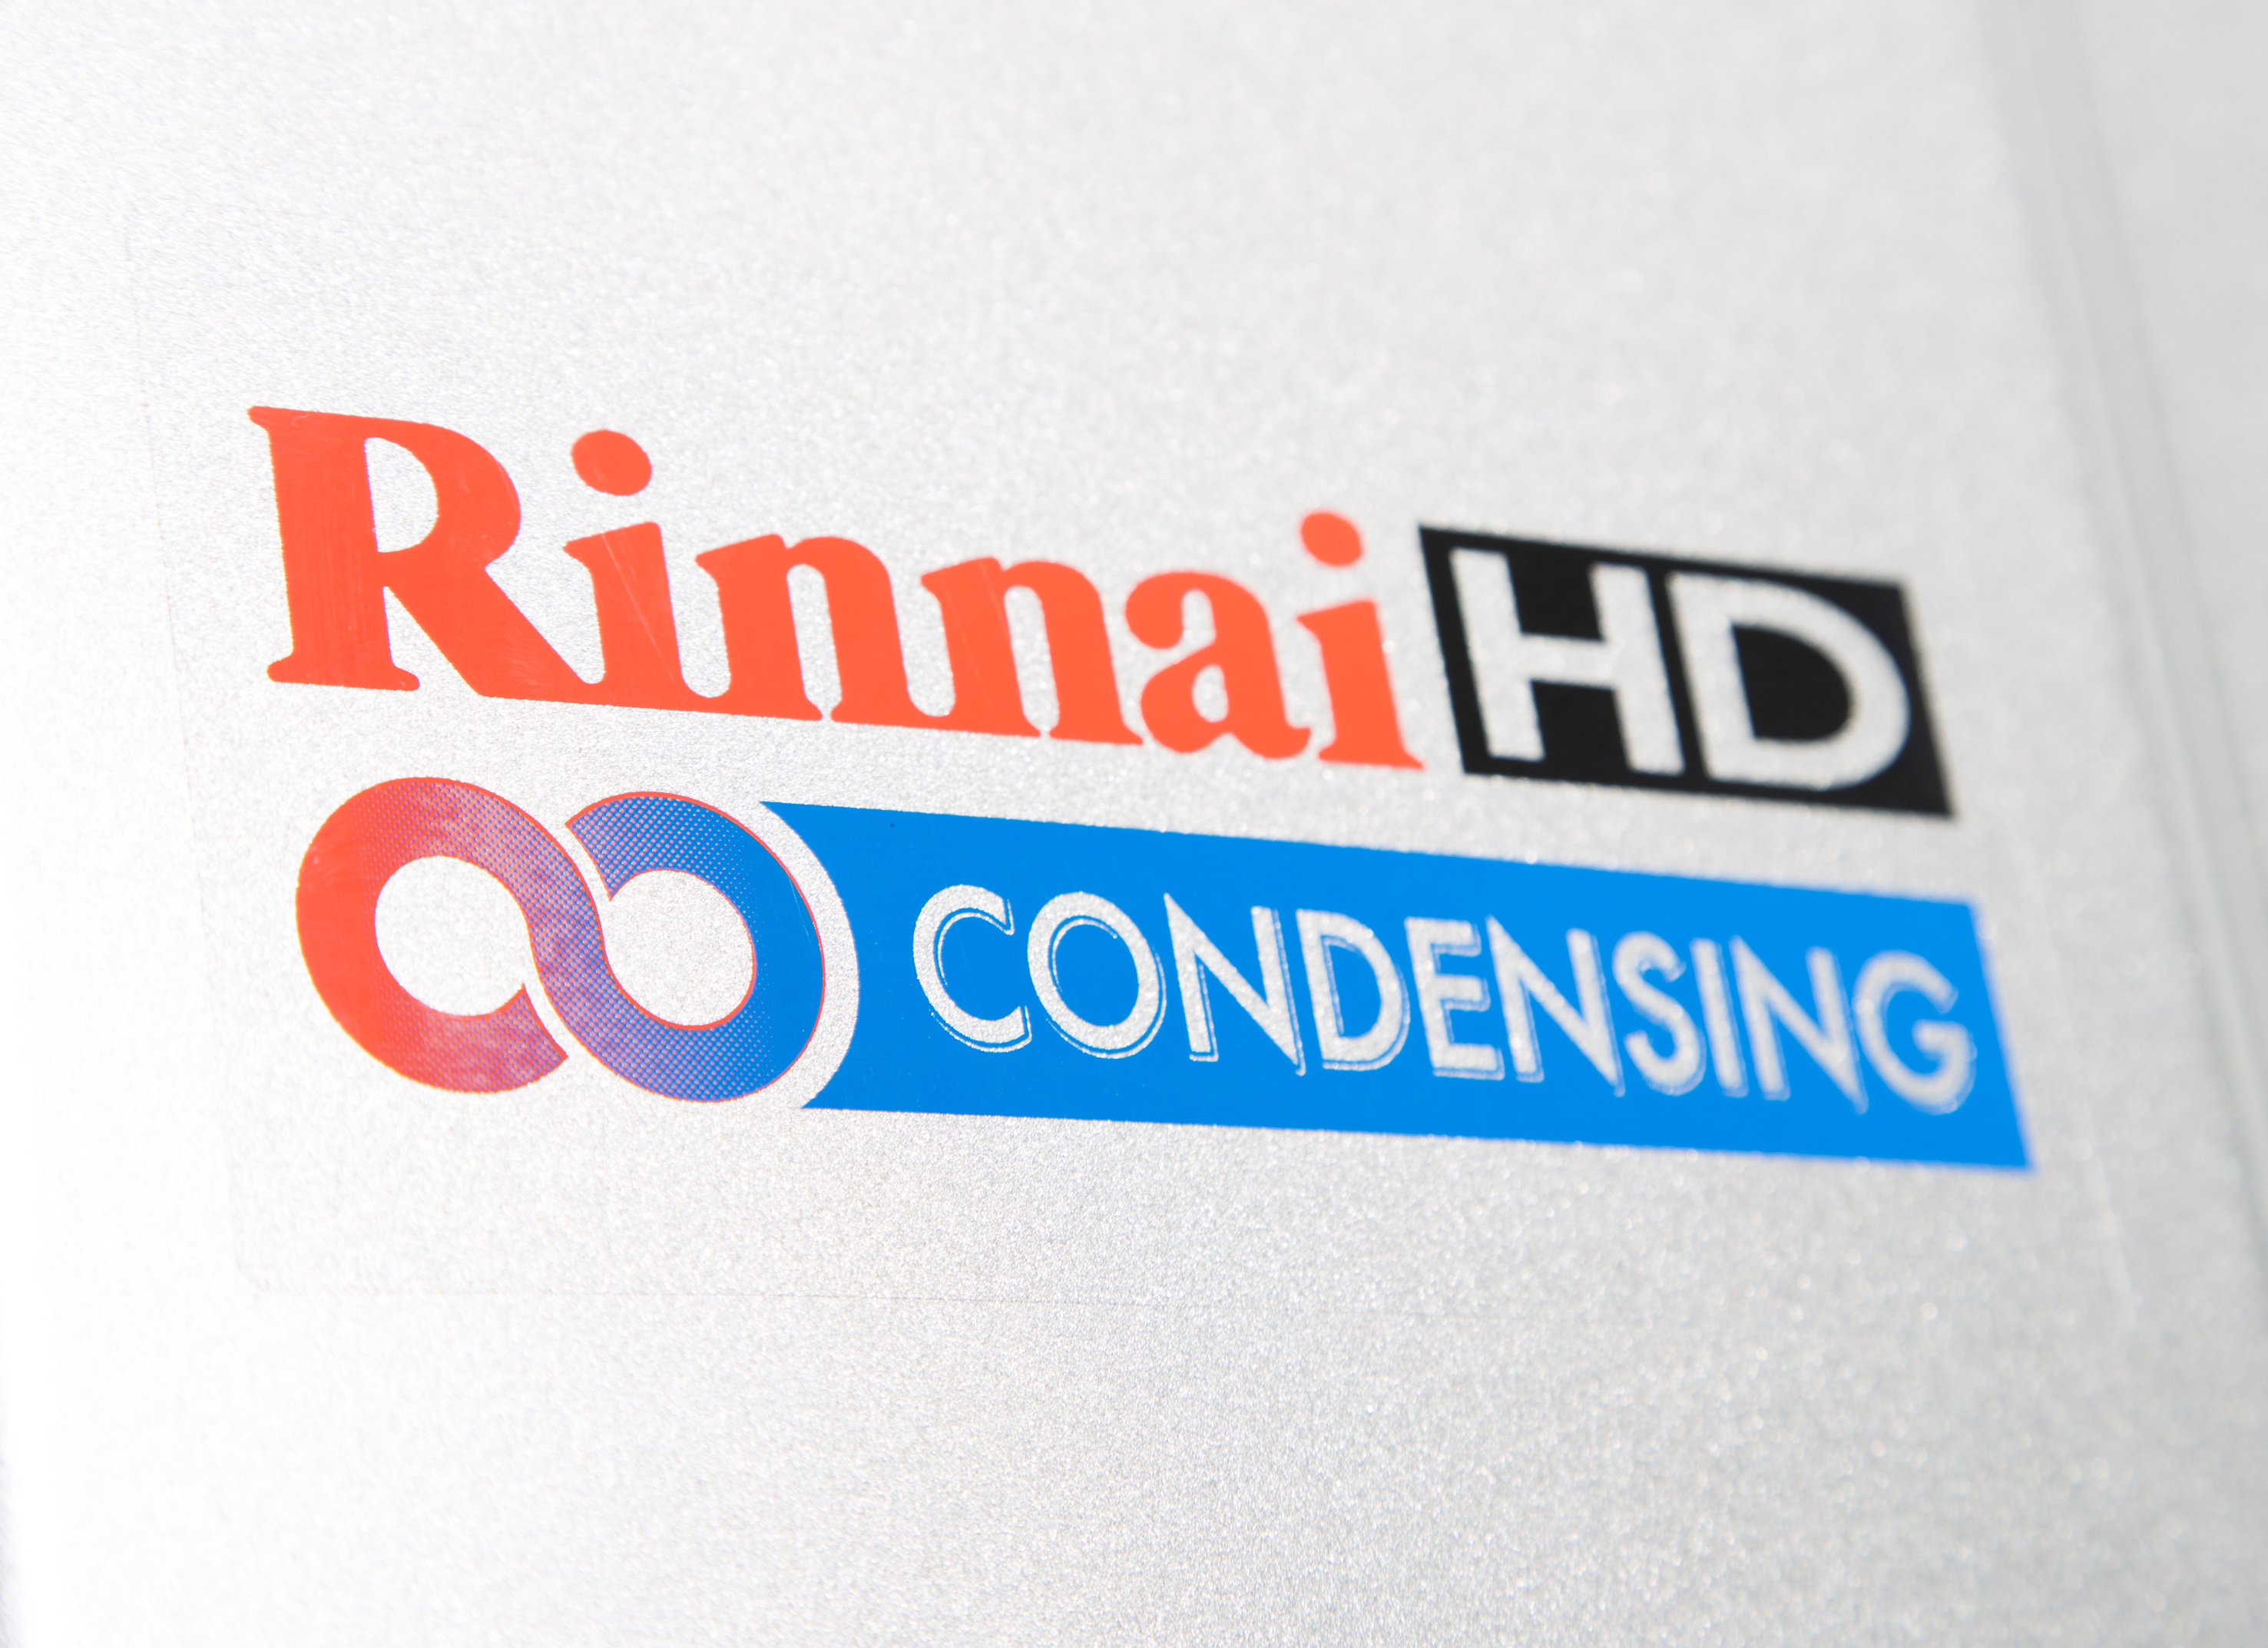 rinnai-cpd-on-continuous-flow-hot-water-delivery-on-demand-now-fully-approved-by-cibse-rinnai